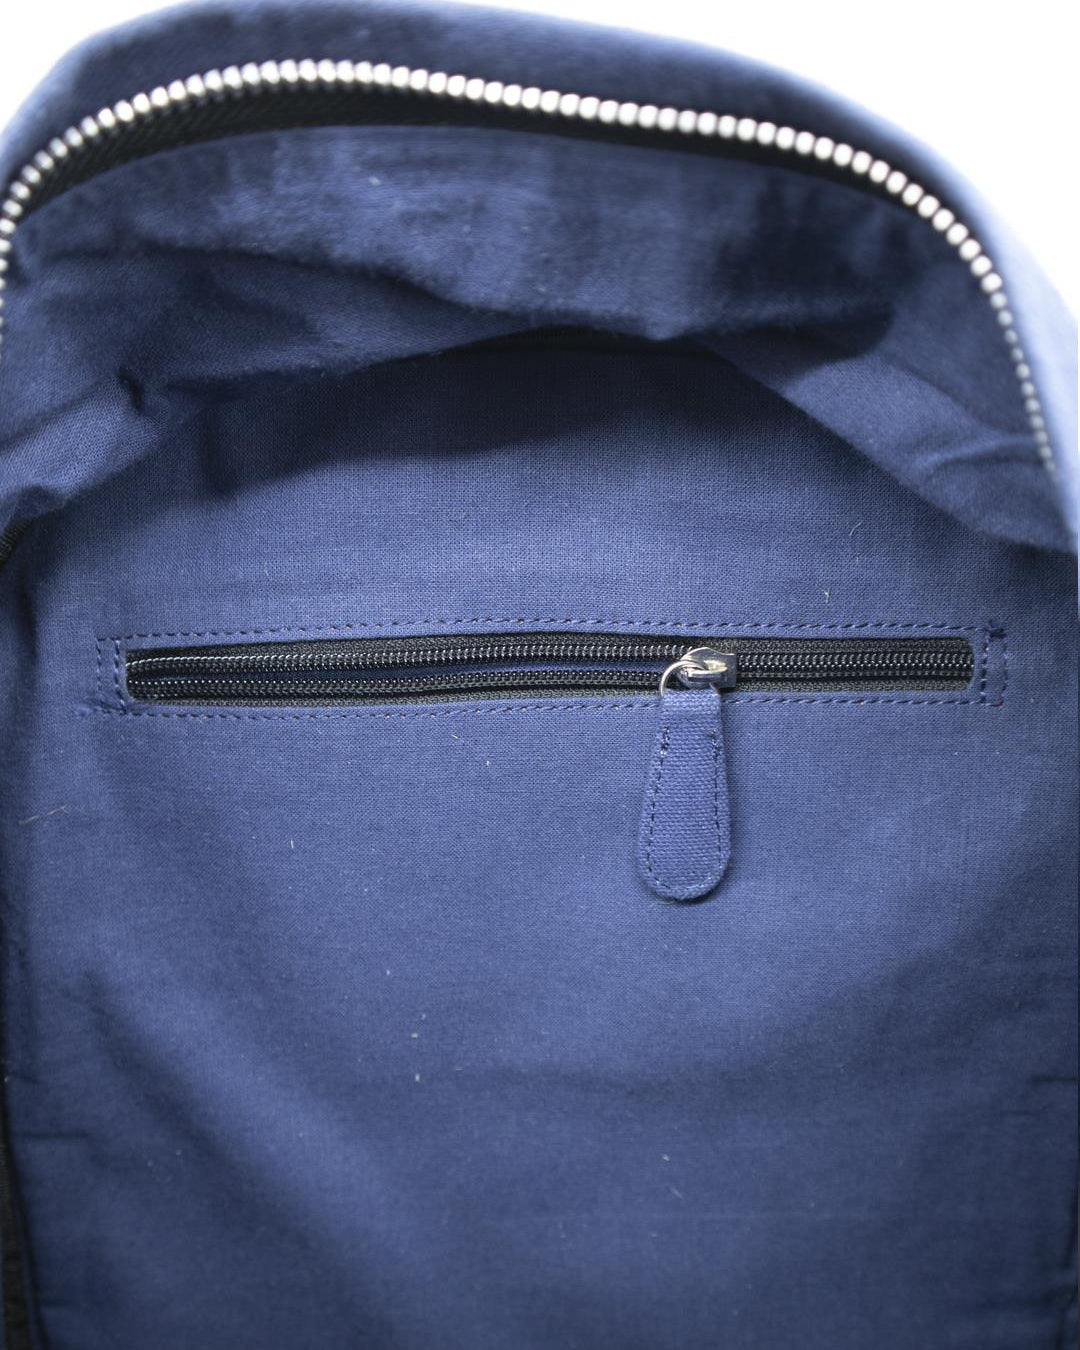 Folk Blue Canvas Backpack - Our Better Planet